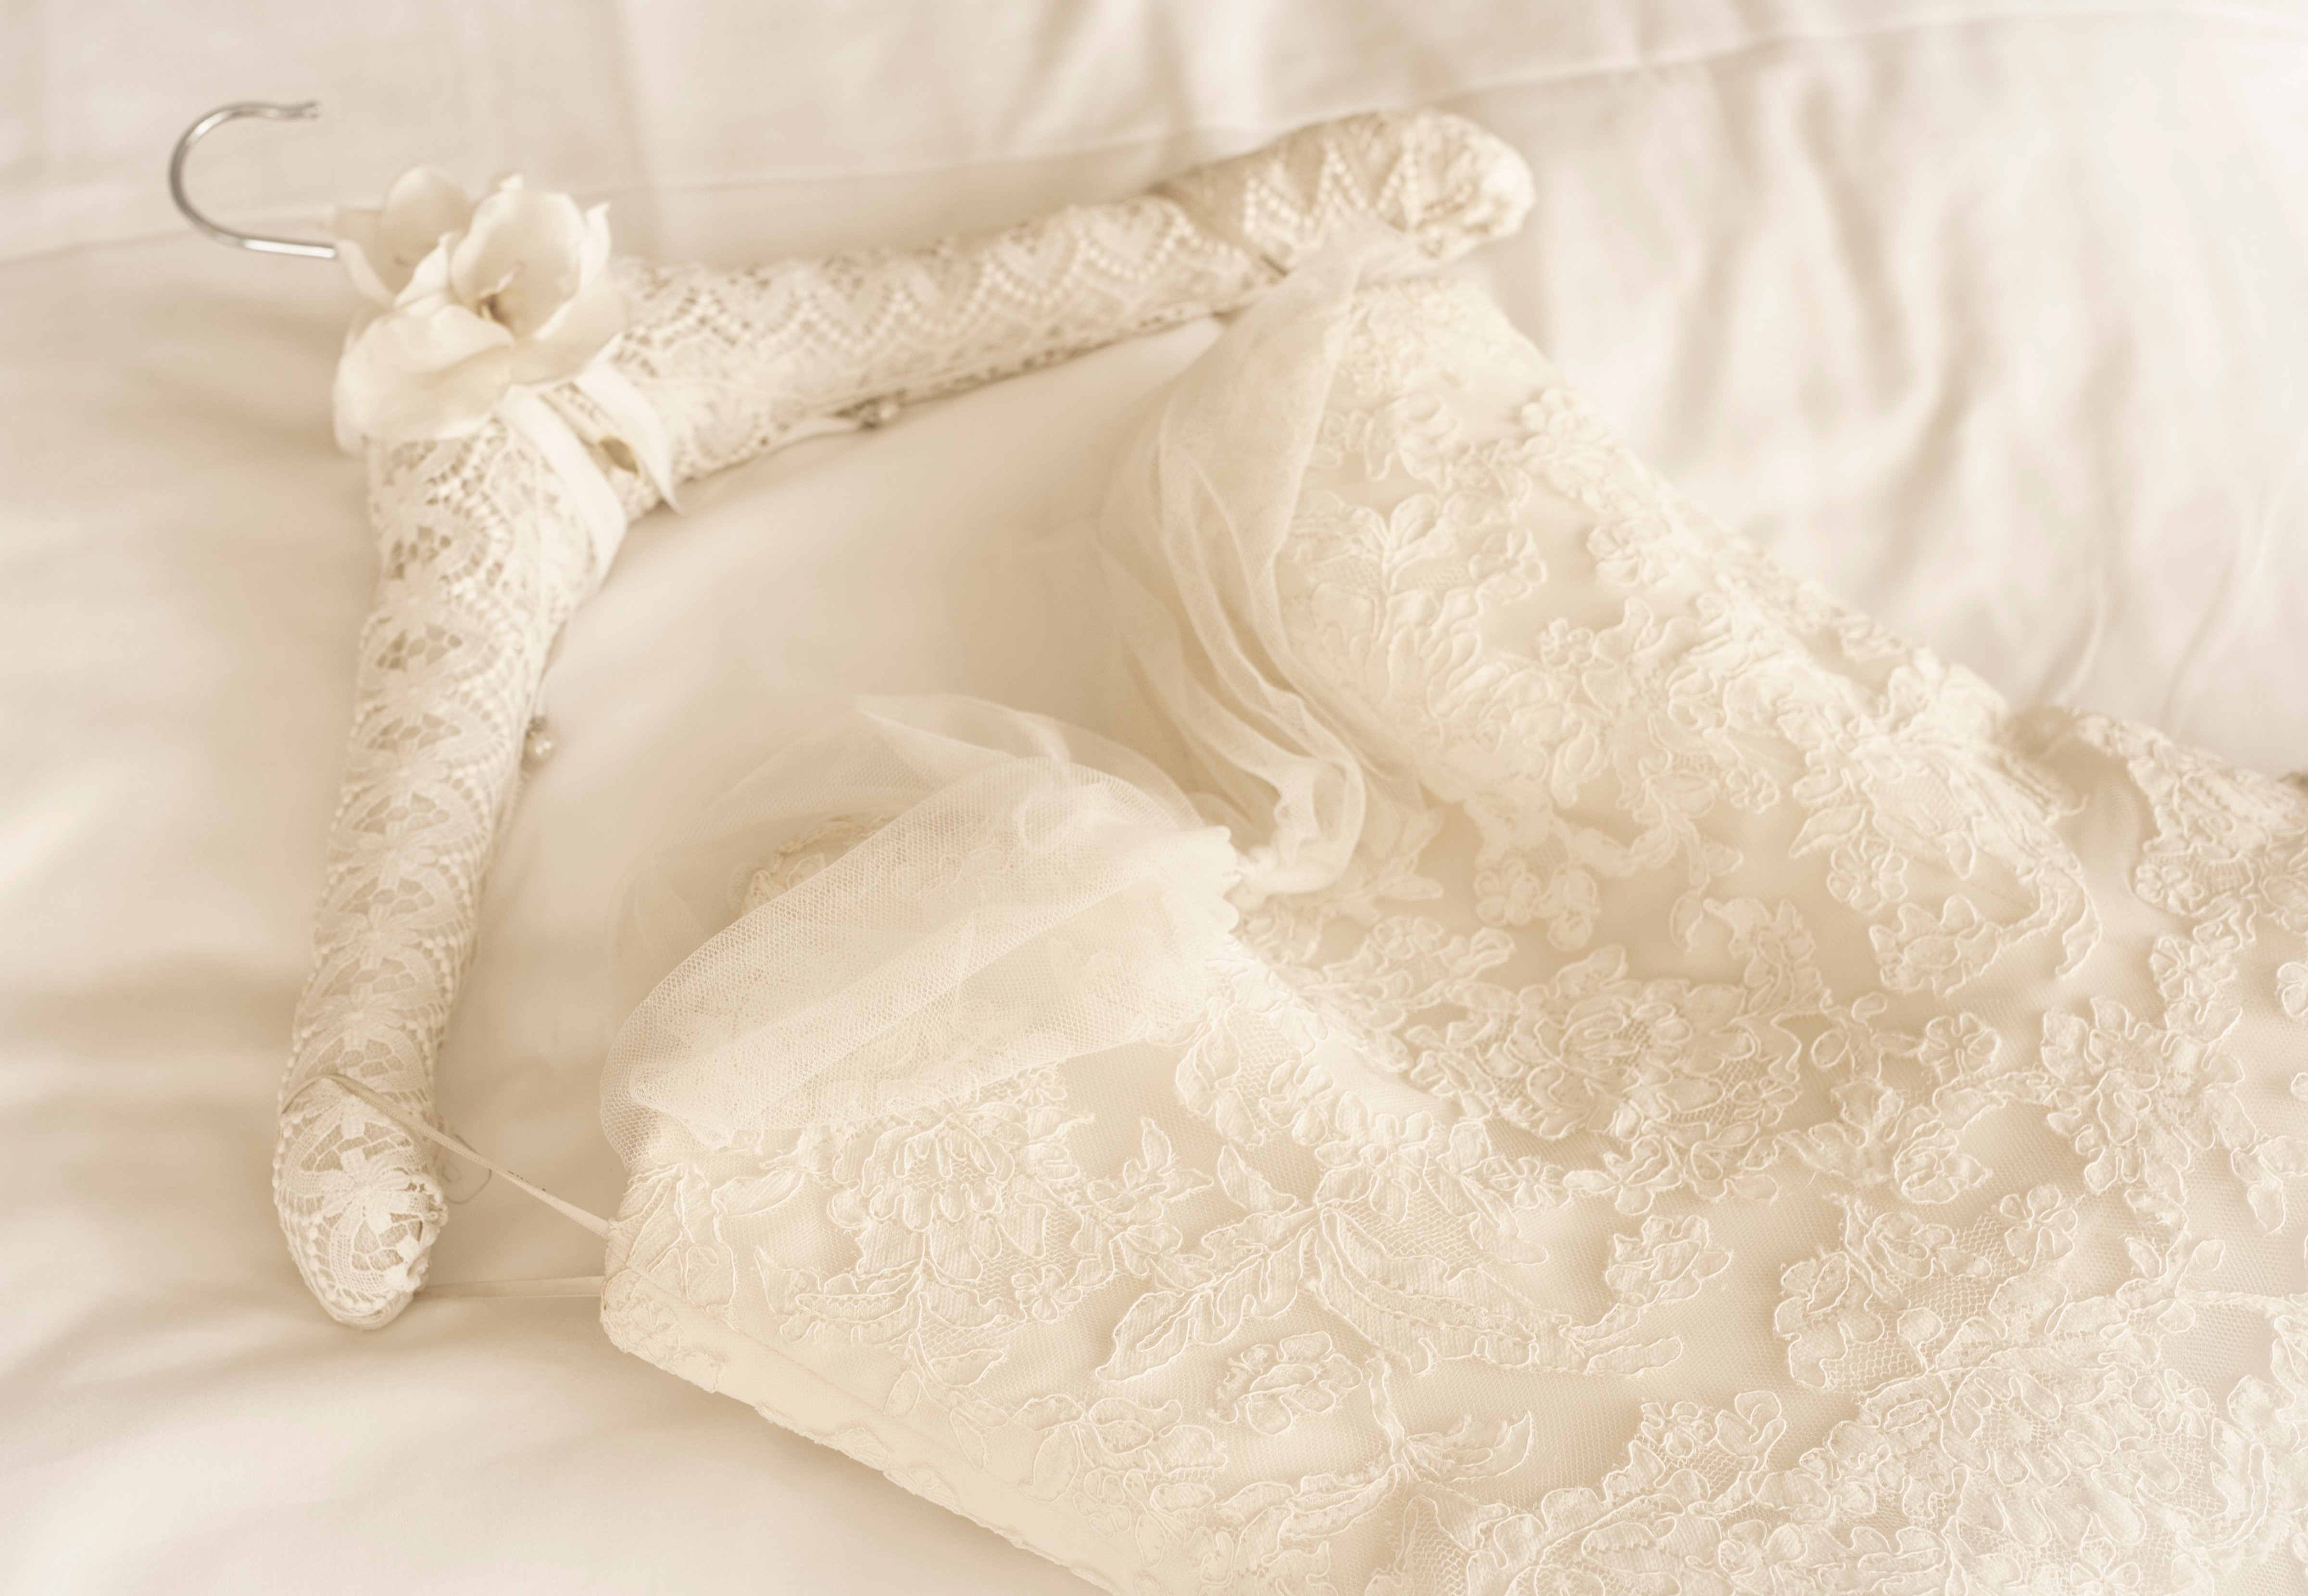 Germany, Lace wedding dress lying on bed